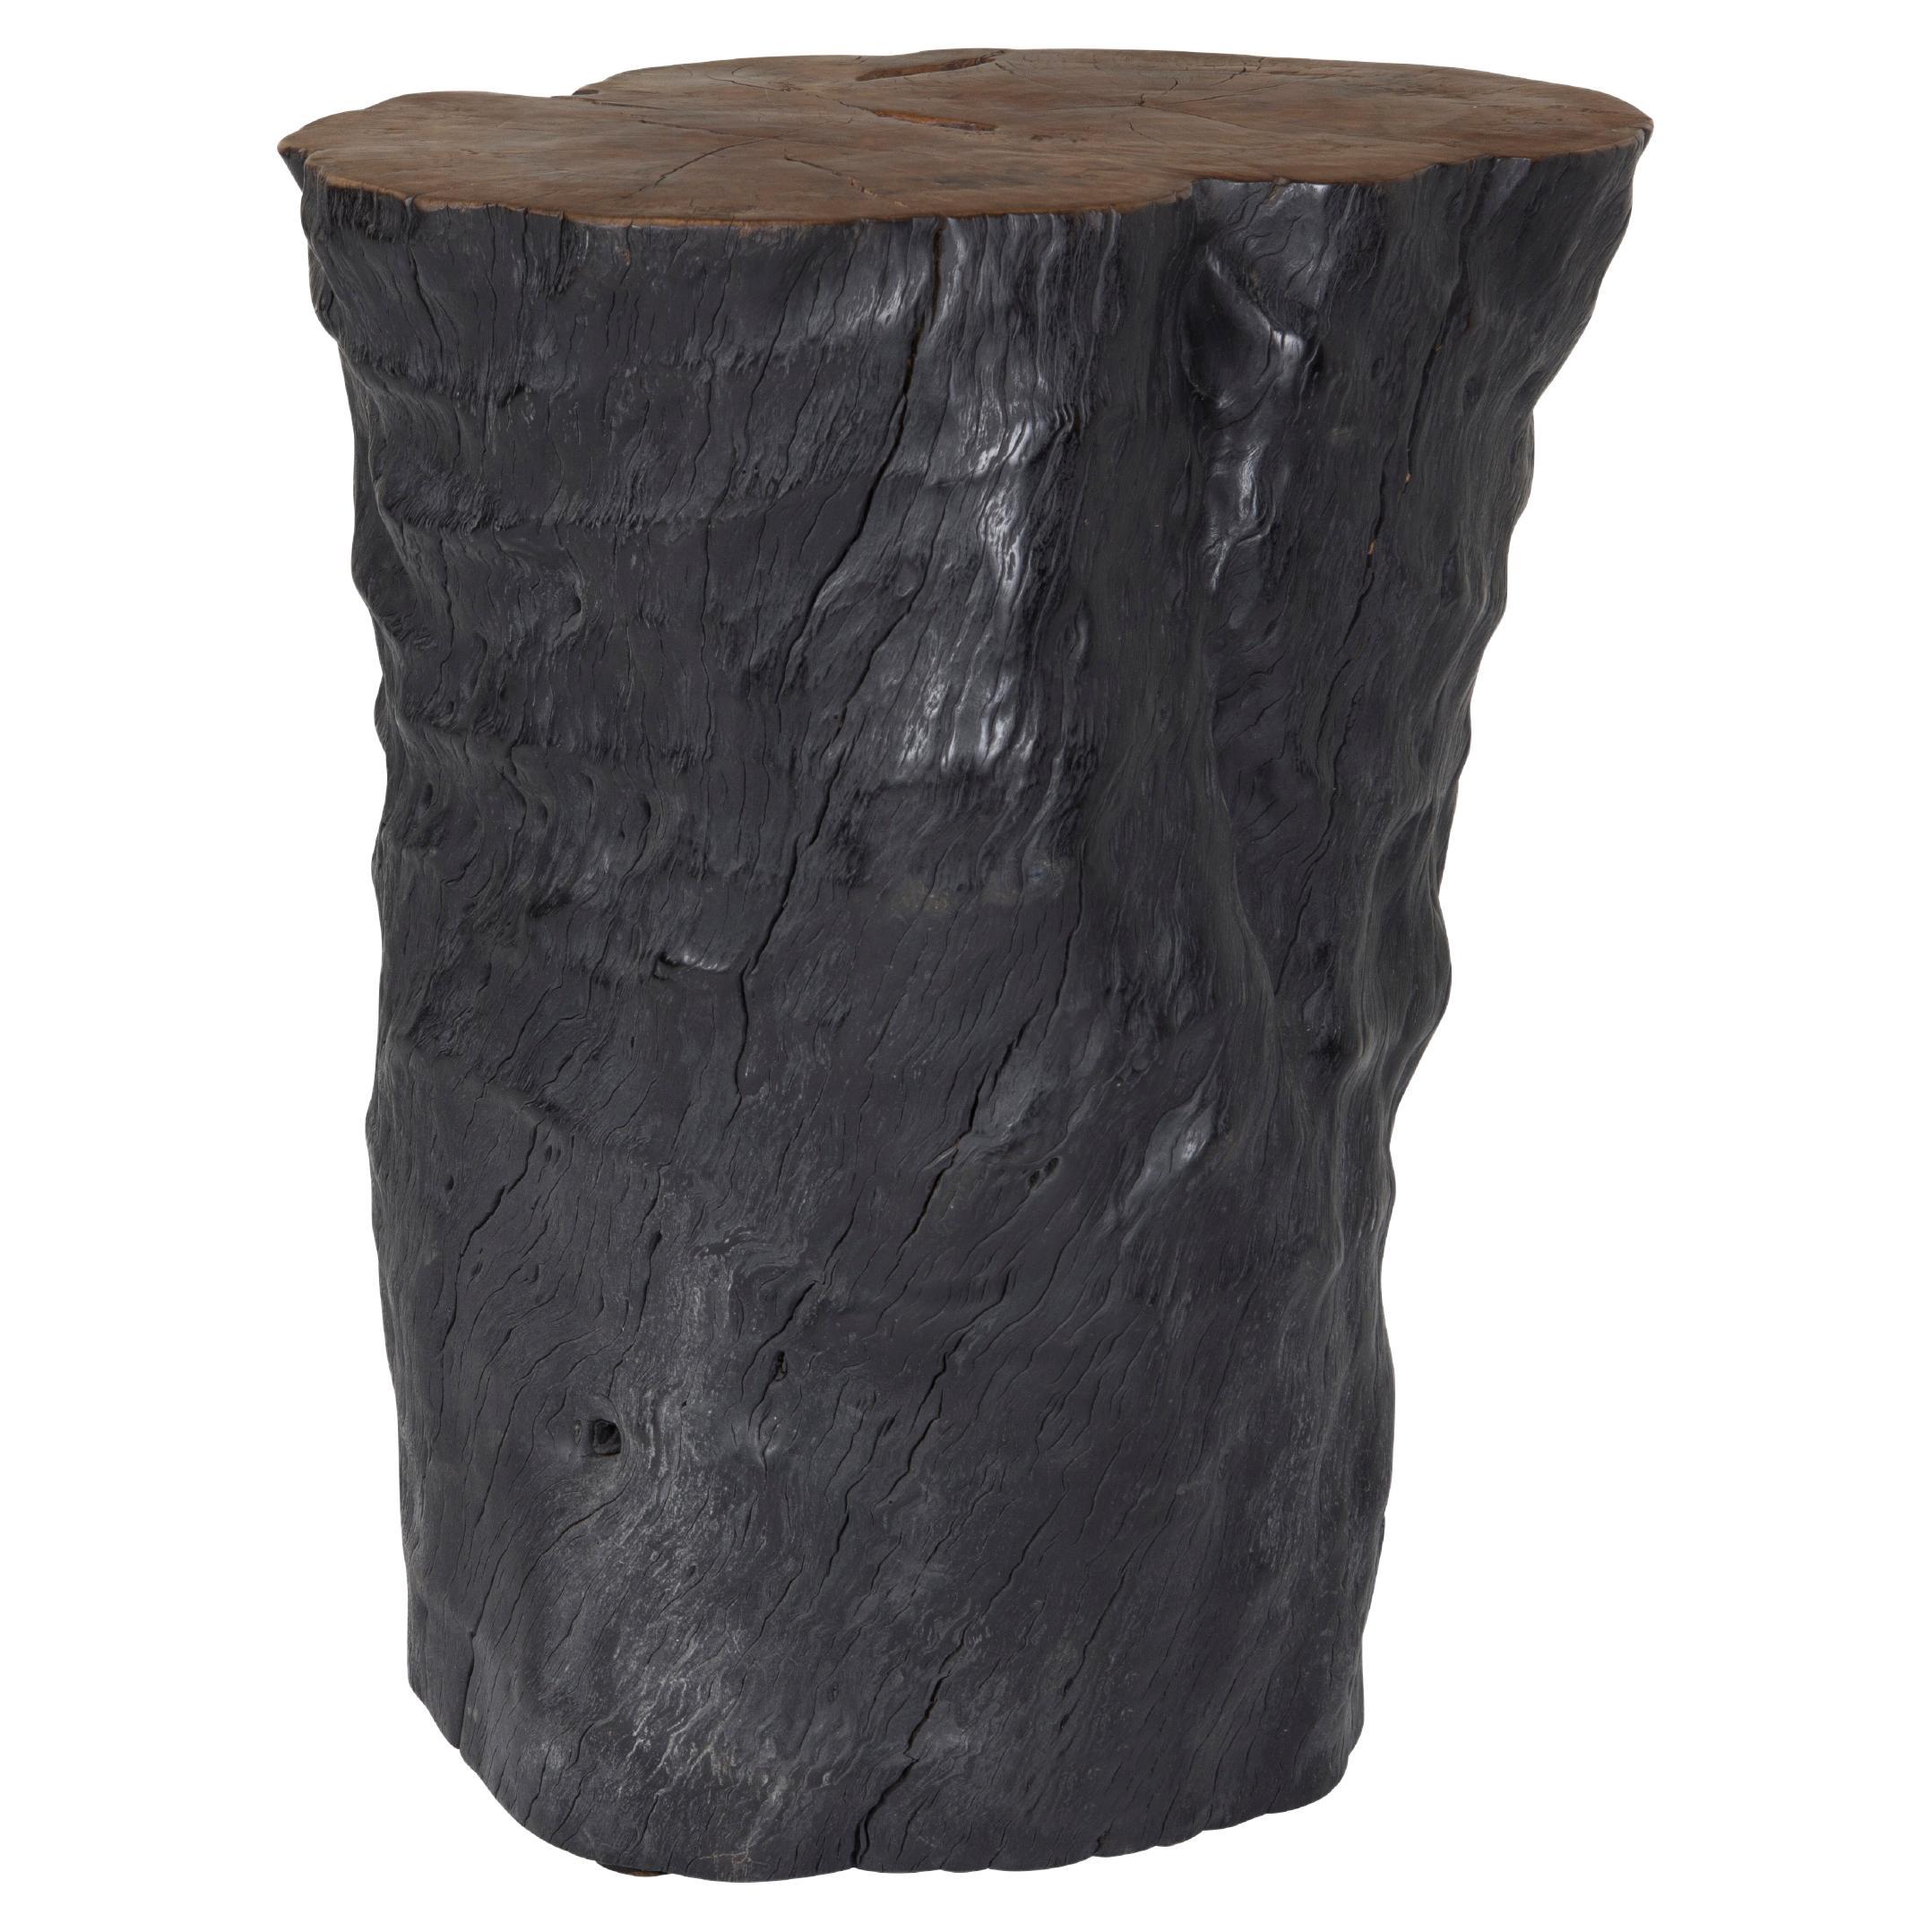 Black Lychee Wood Stump End Table with Warm Top